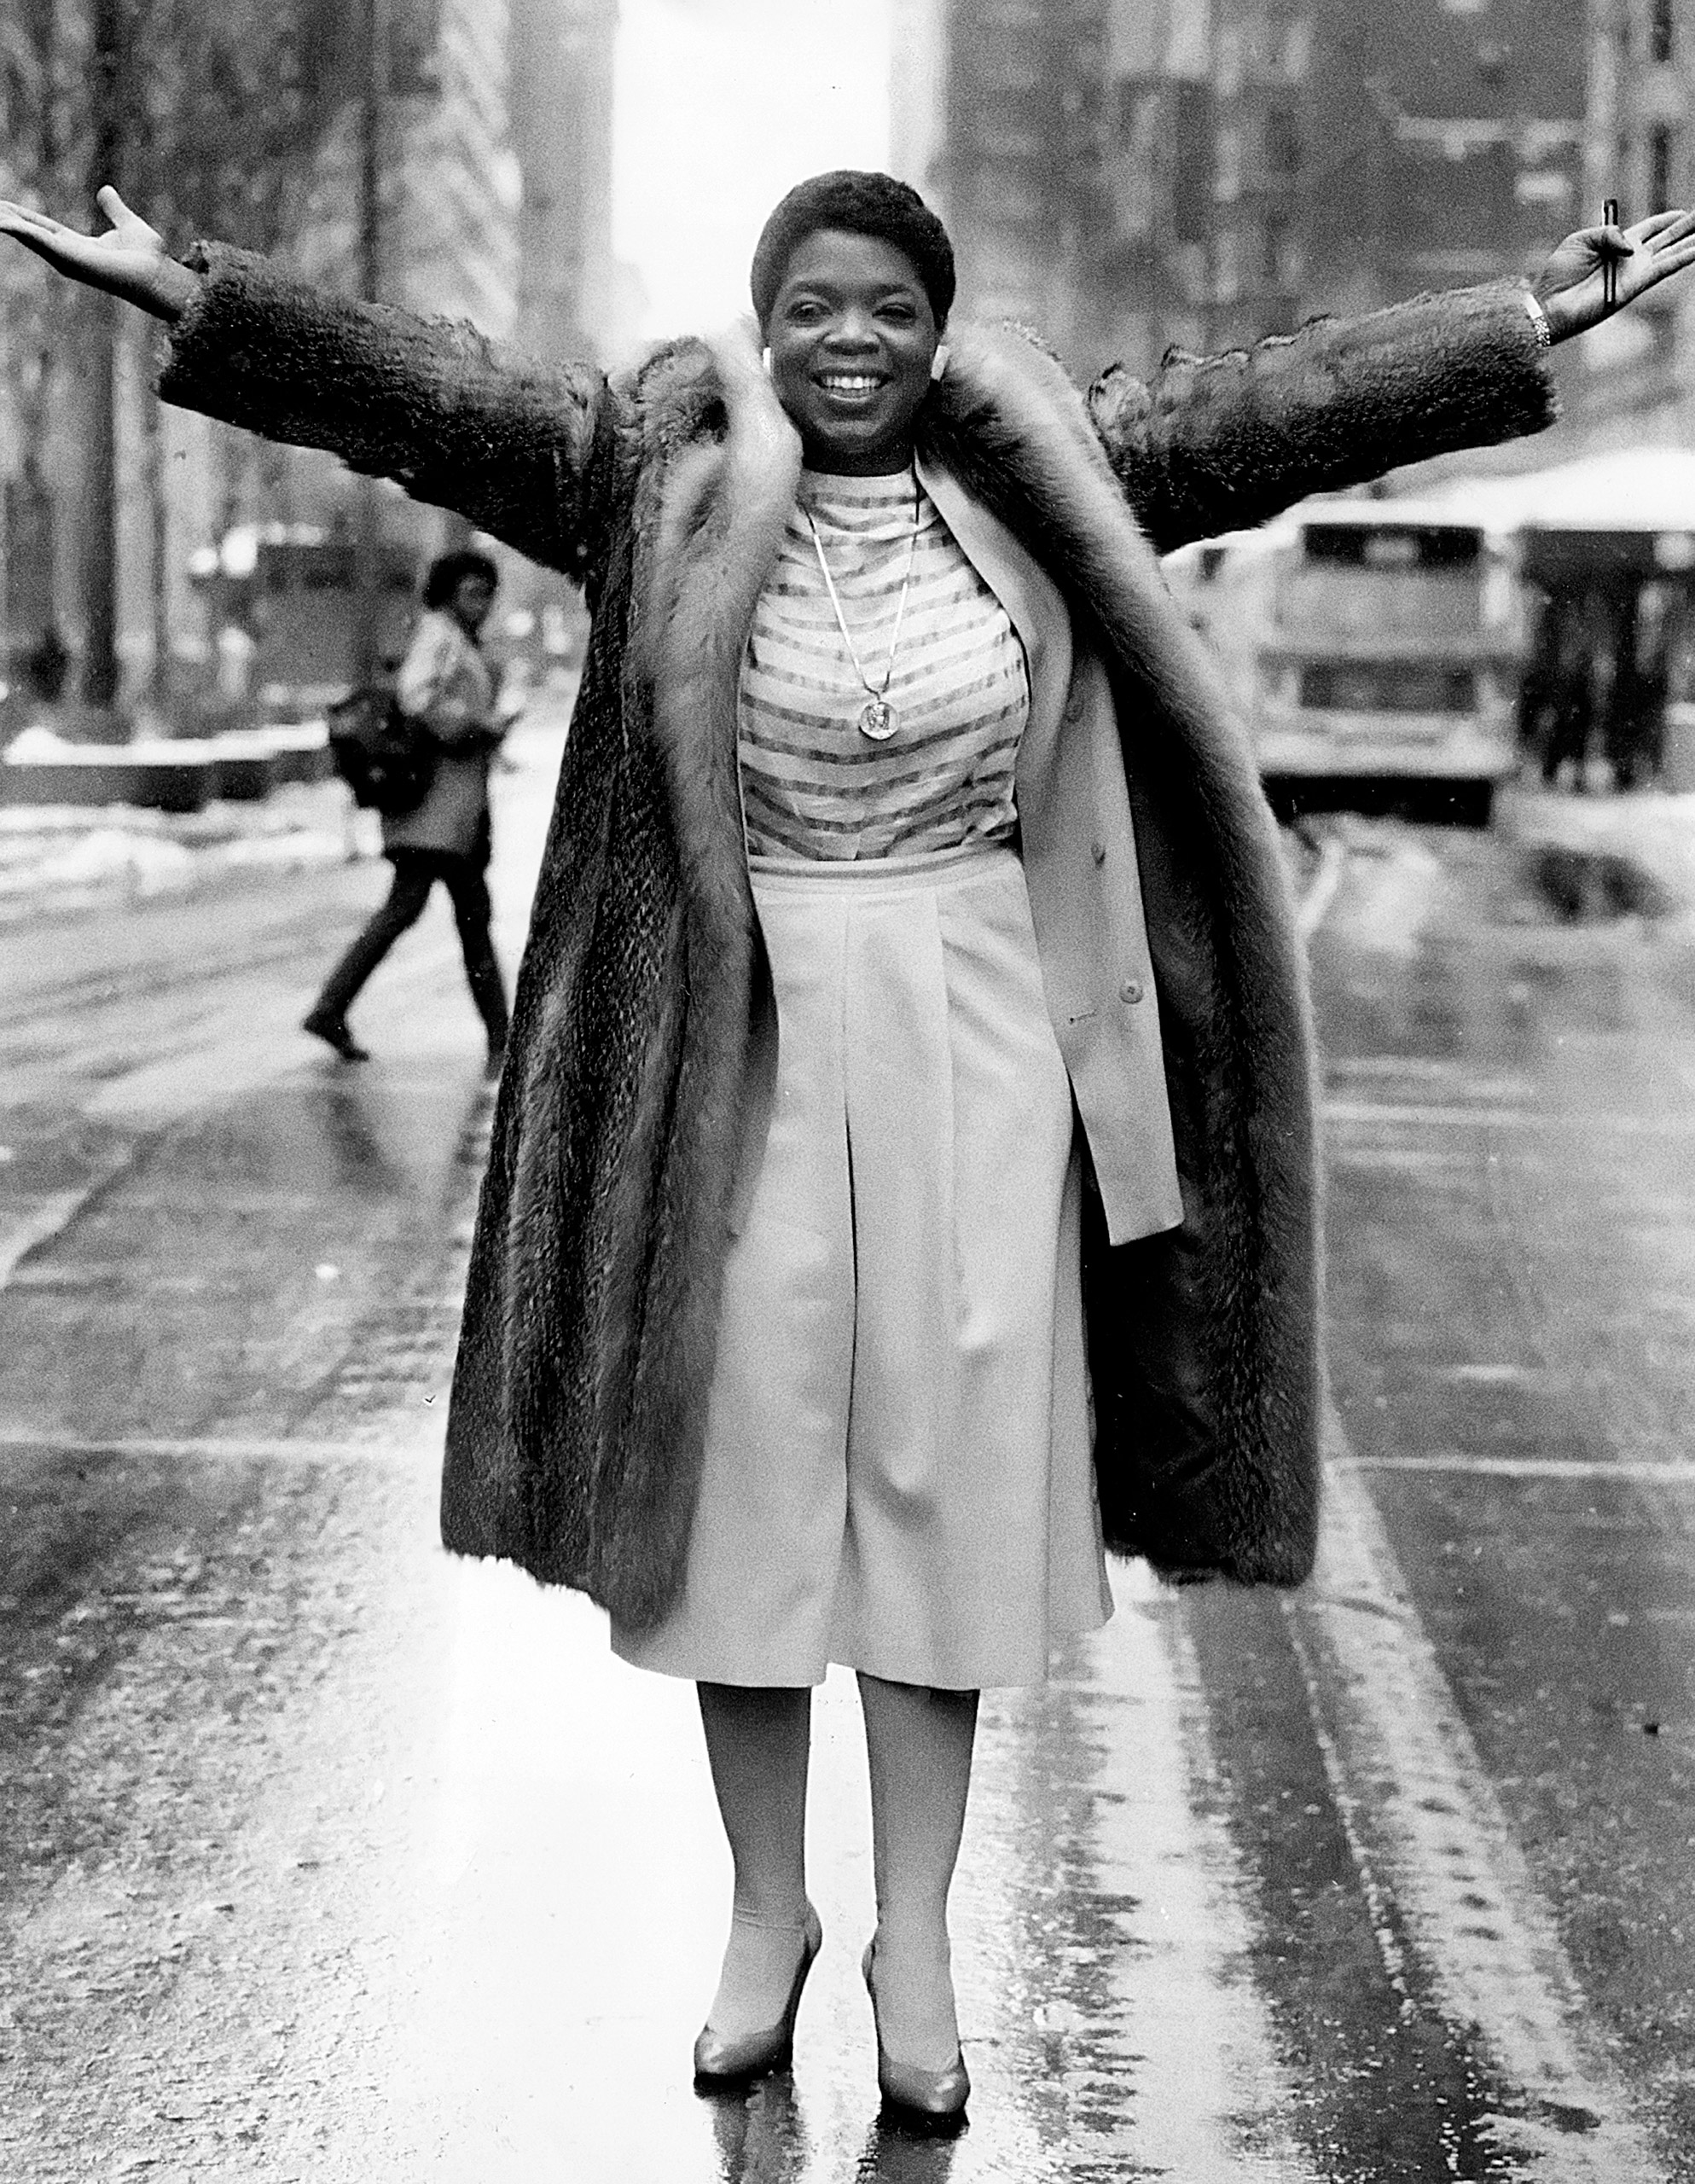 Oprah Winfrey, the host of "AM Chicago", poses for a photo on State Street in Chicago, Illinois, 1984.